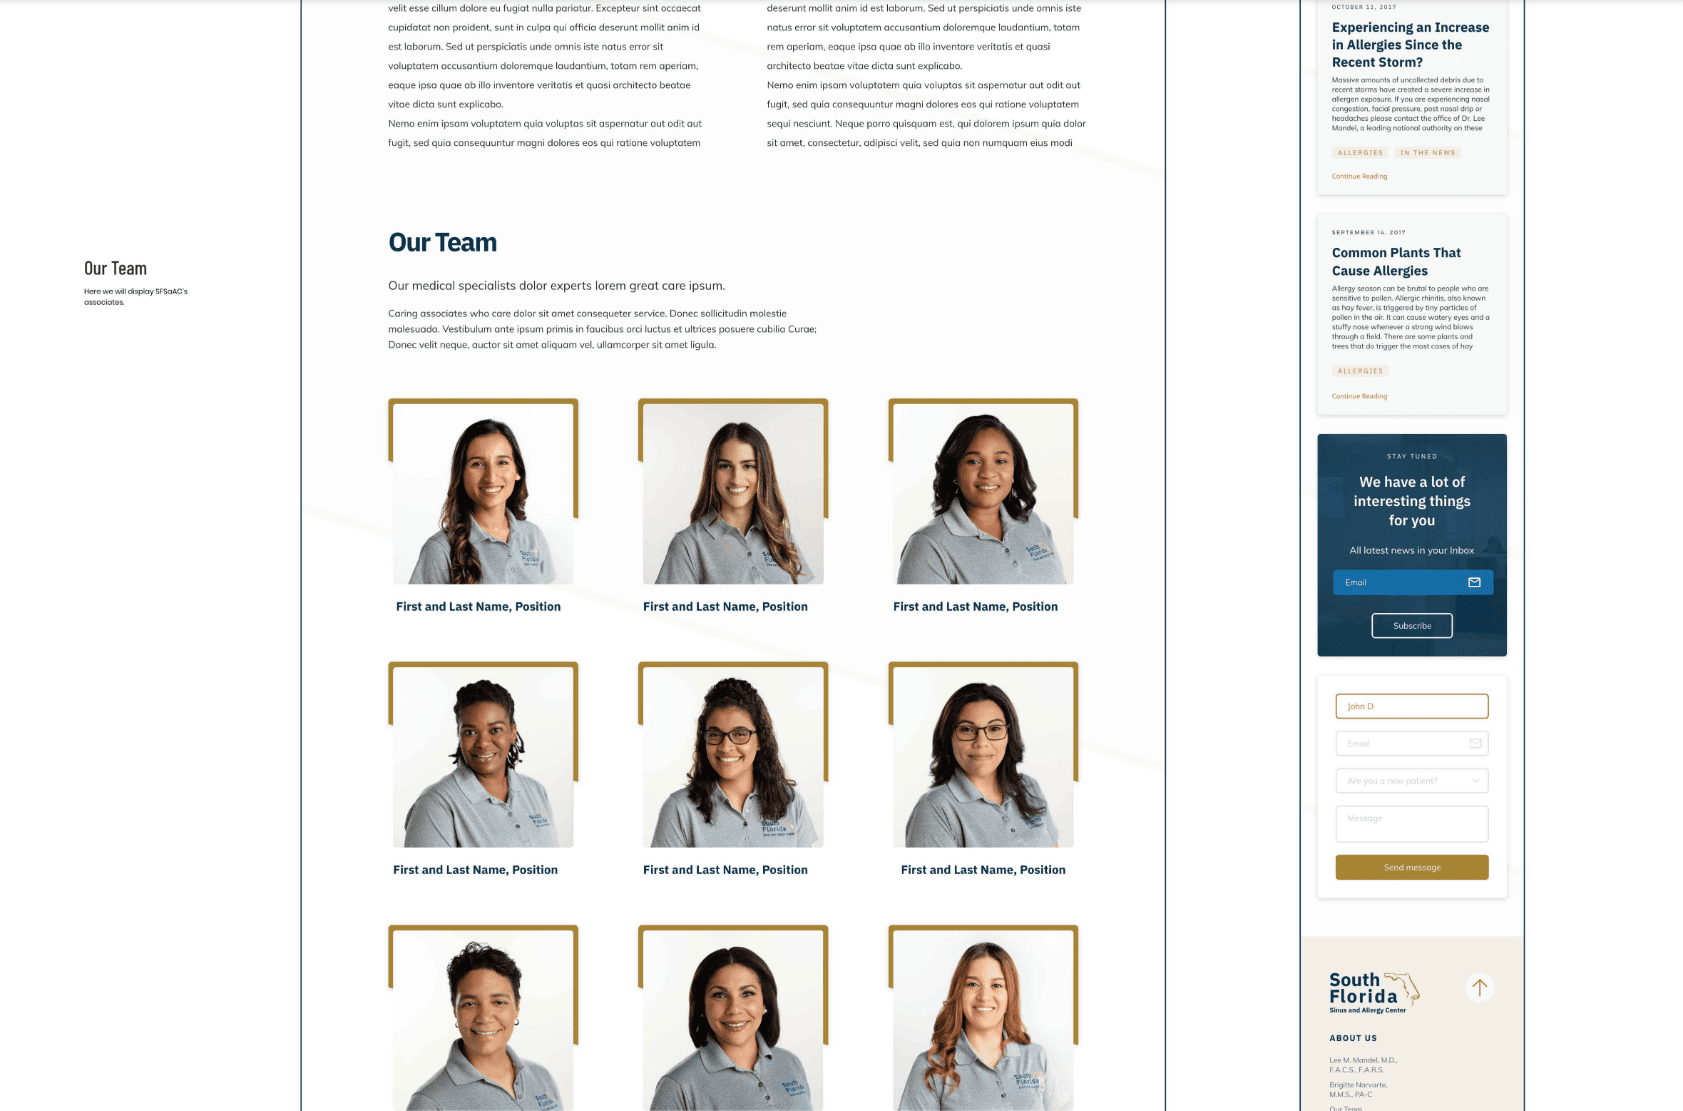 South Florida Sinus and Allergy Center Our Team page mockup